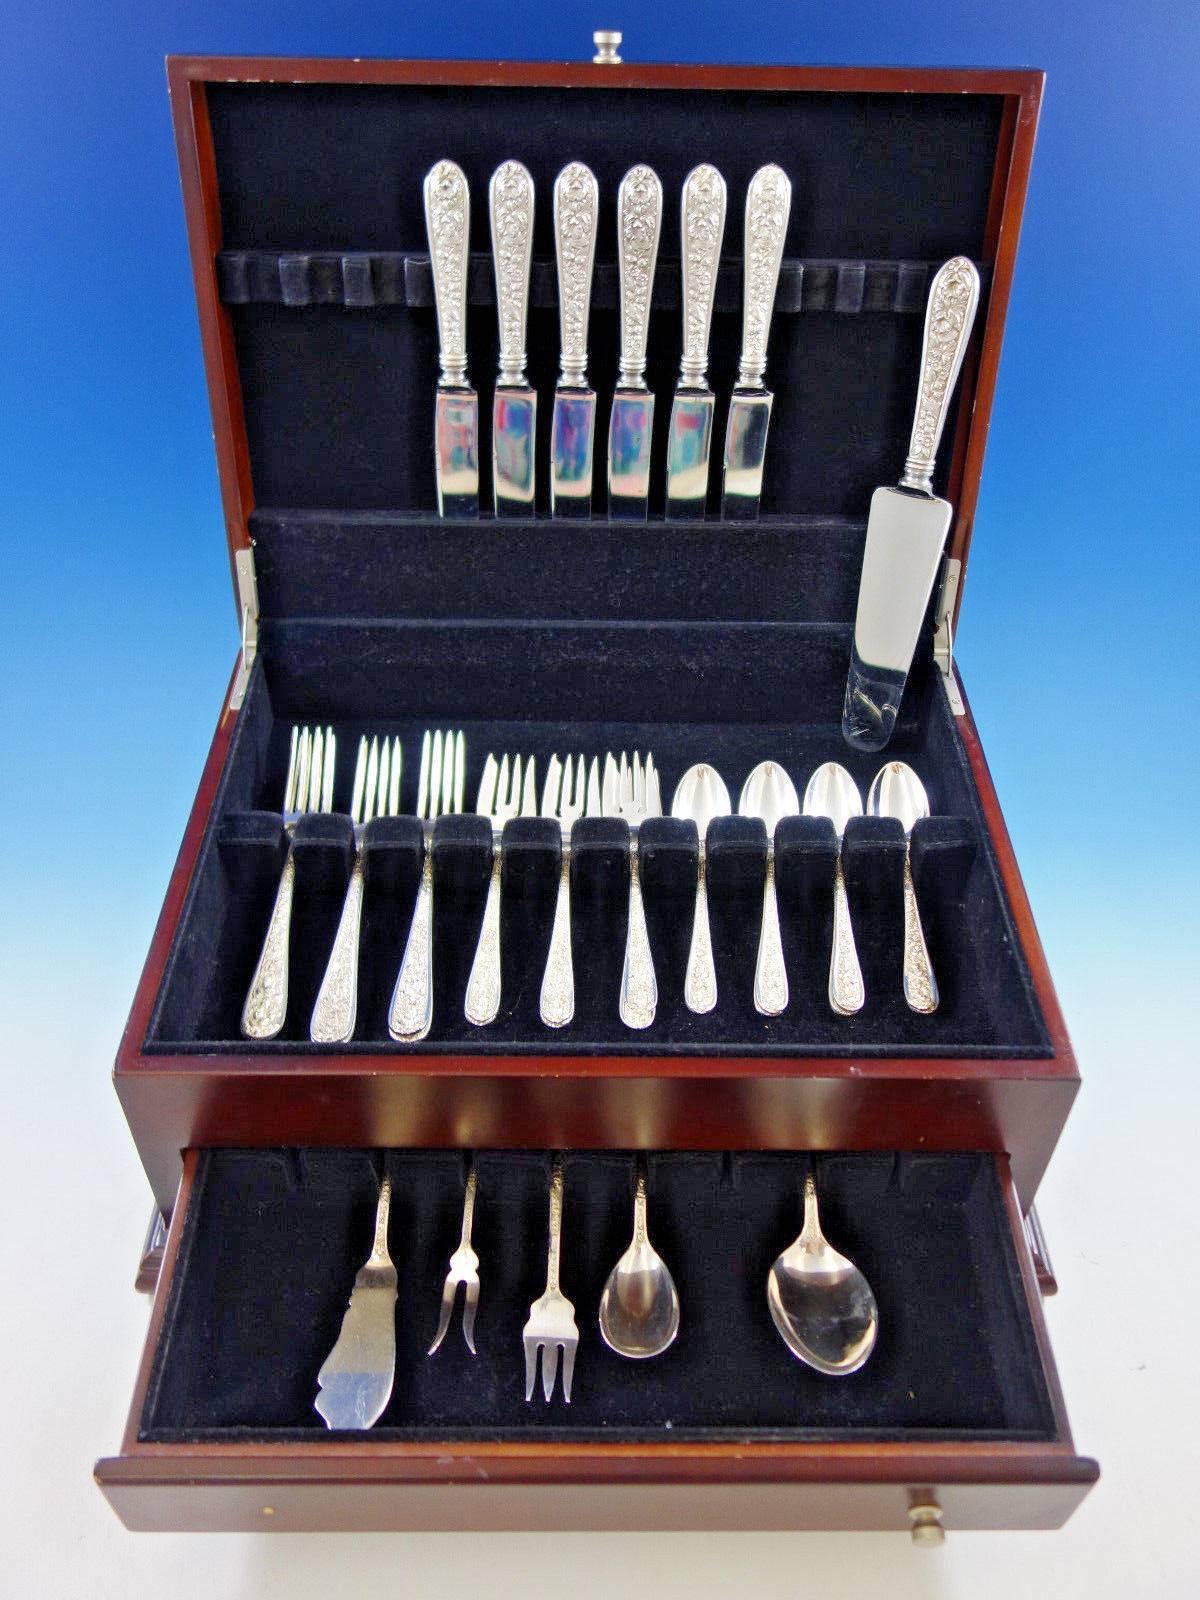 Corsage by Stieff sterling silver flatware set, 30 pieces. Great starter set! This set includes: 

Six knives, 9